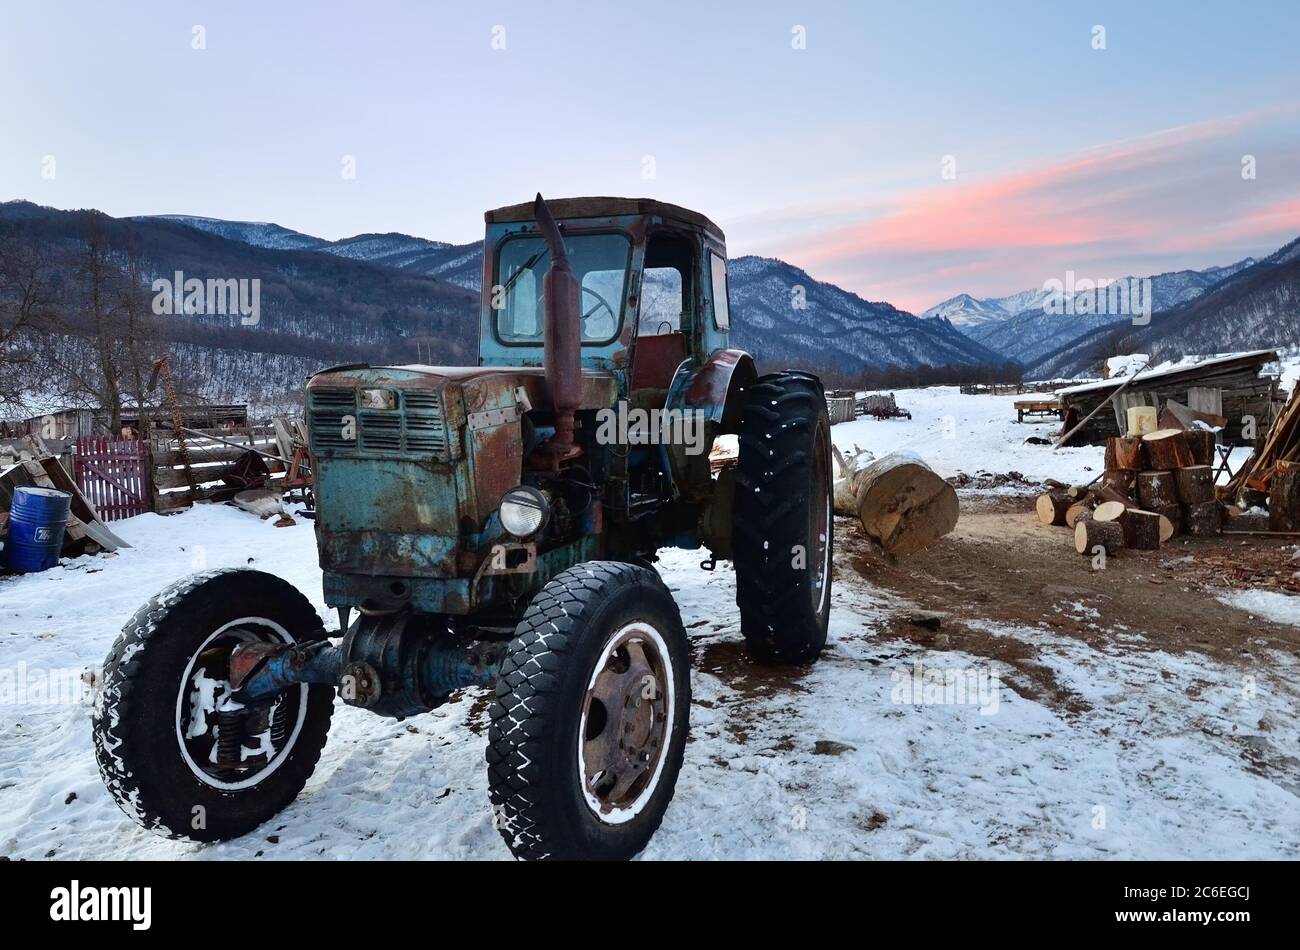 Caucasus, Russia - Feb 18, 2012: Old rusty soviet tractor shown on courtyard farmhouse in village in mountain region of Caucasus mountain at sunrise i Stock Photo